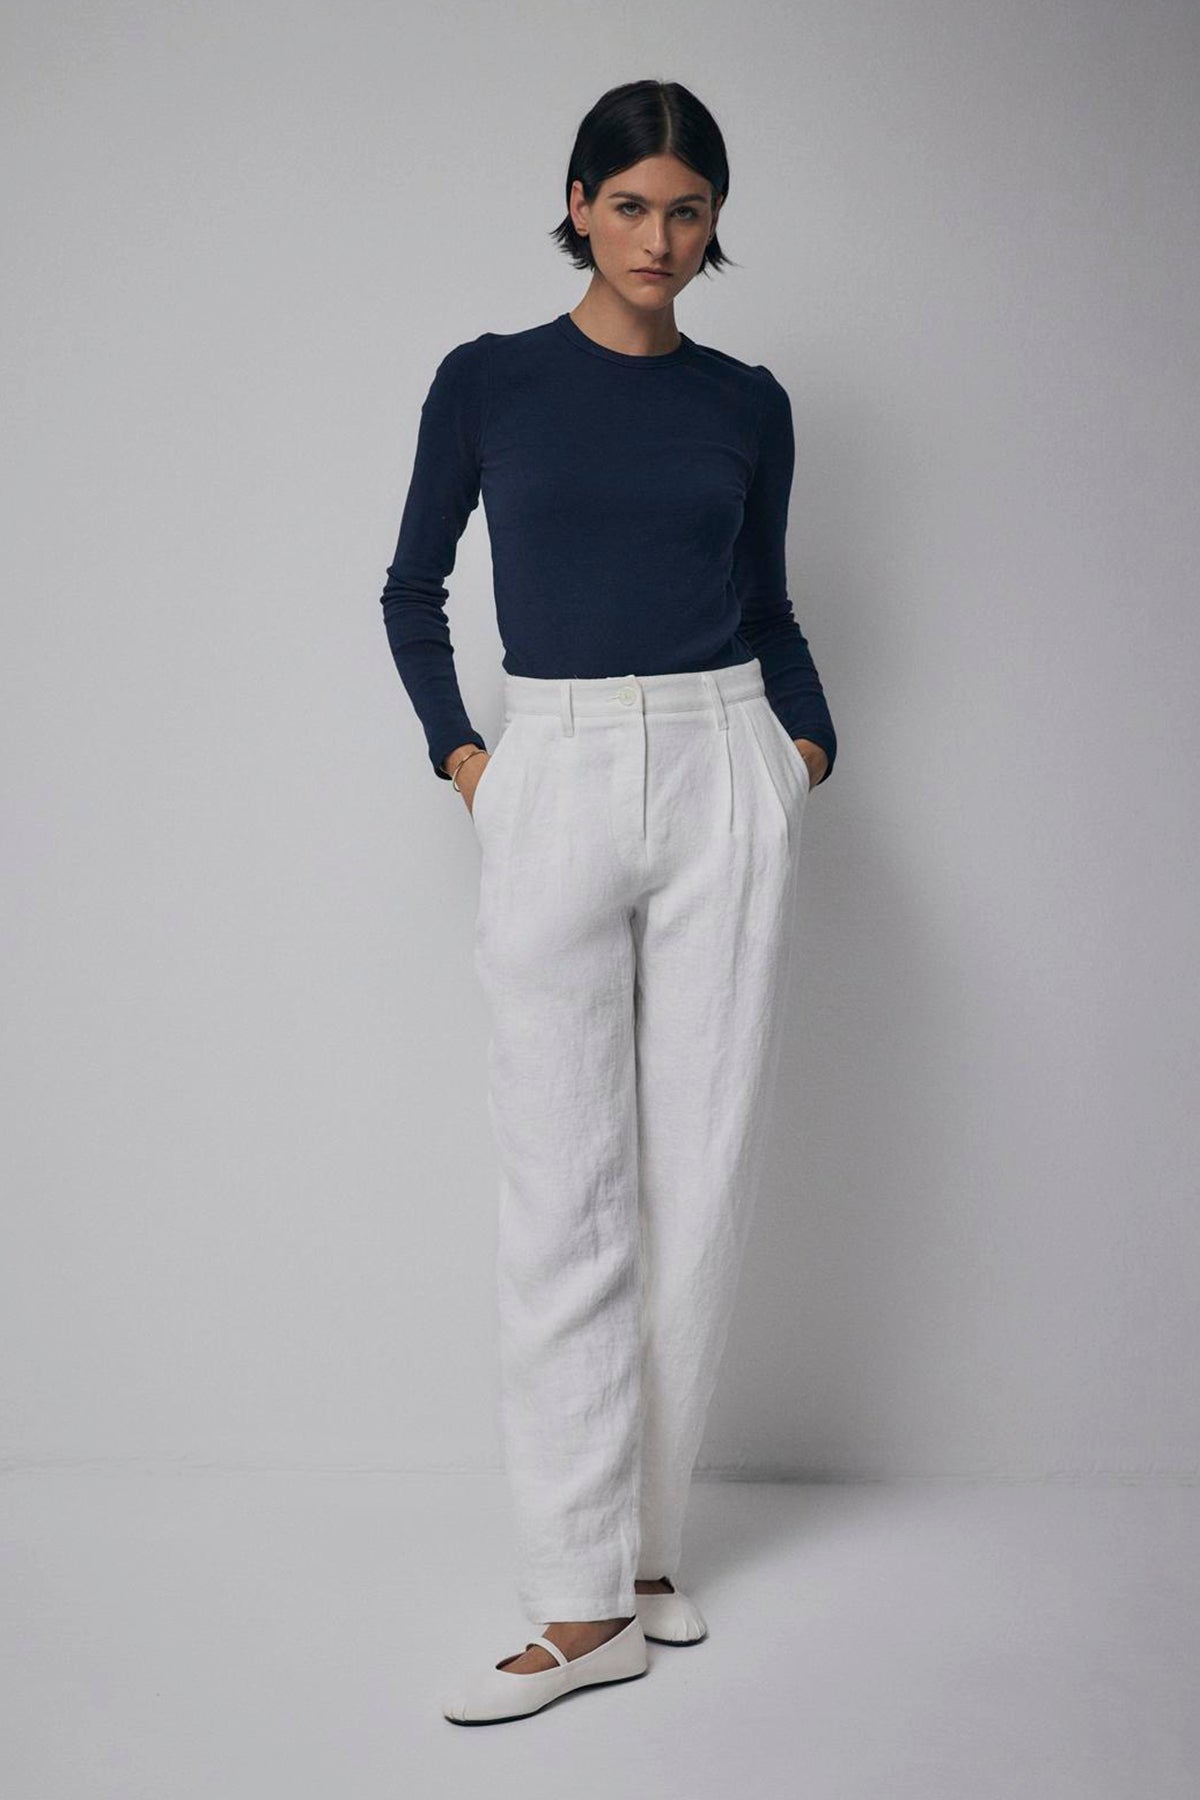   Woman in a navy blue top and Velvet by Jenny Graham's POMONA PANT posing against a gray background. 